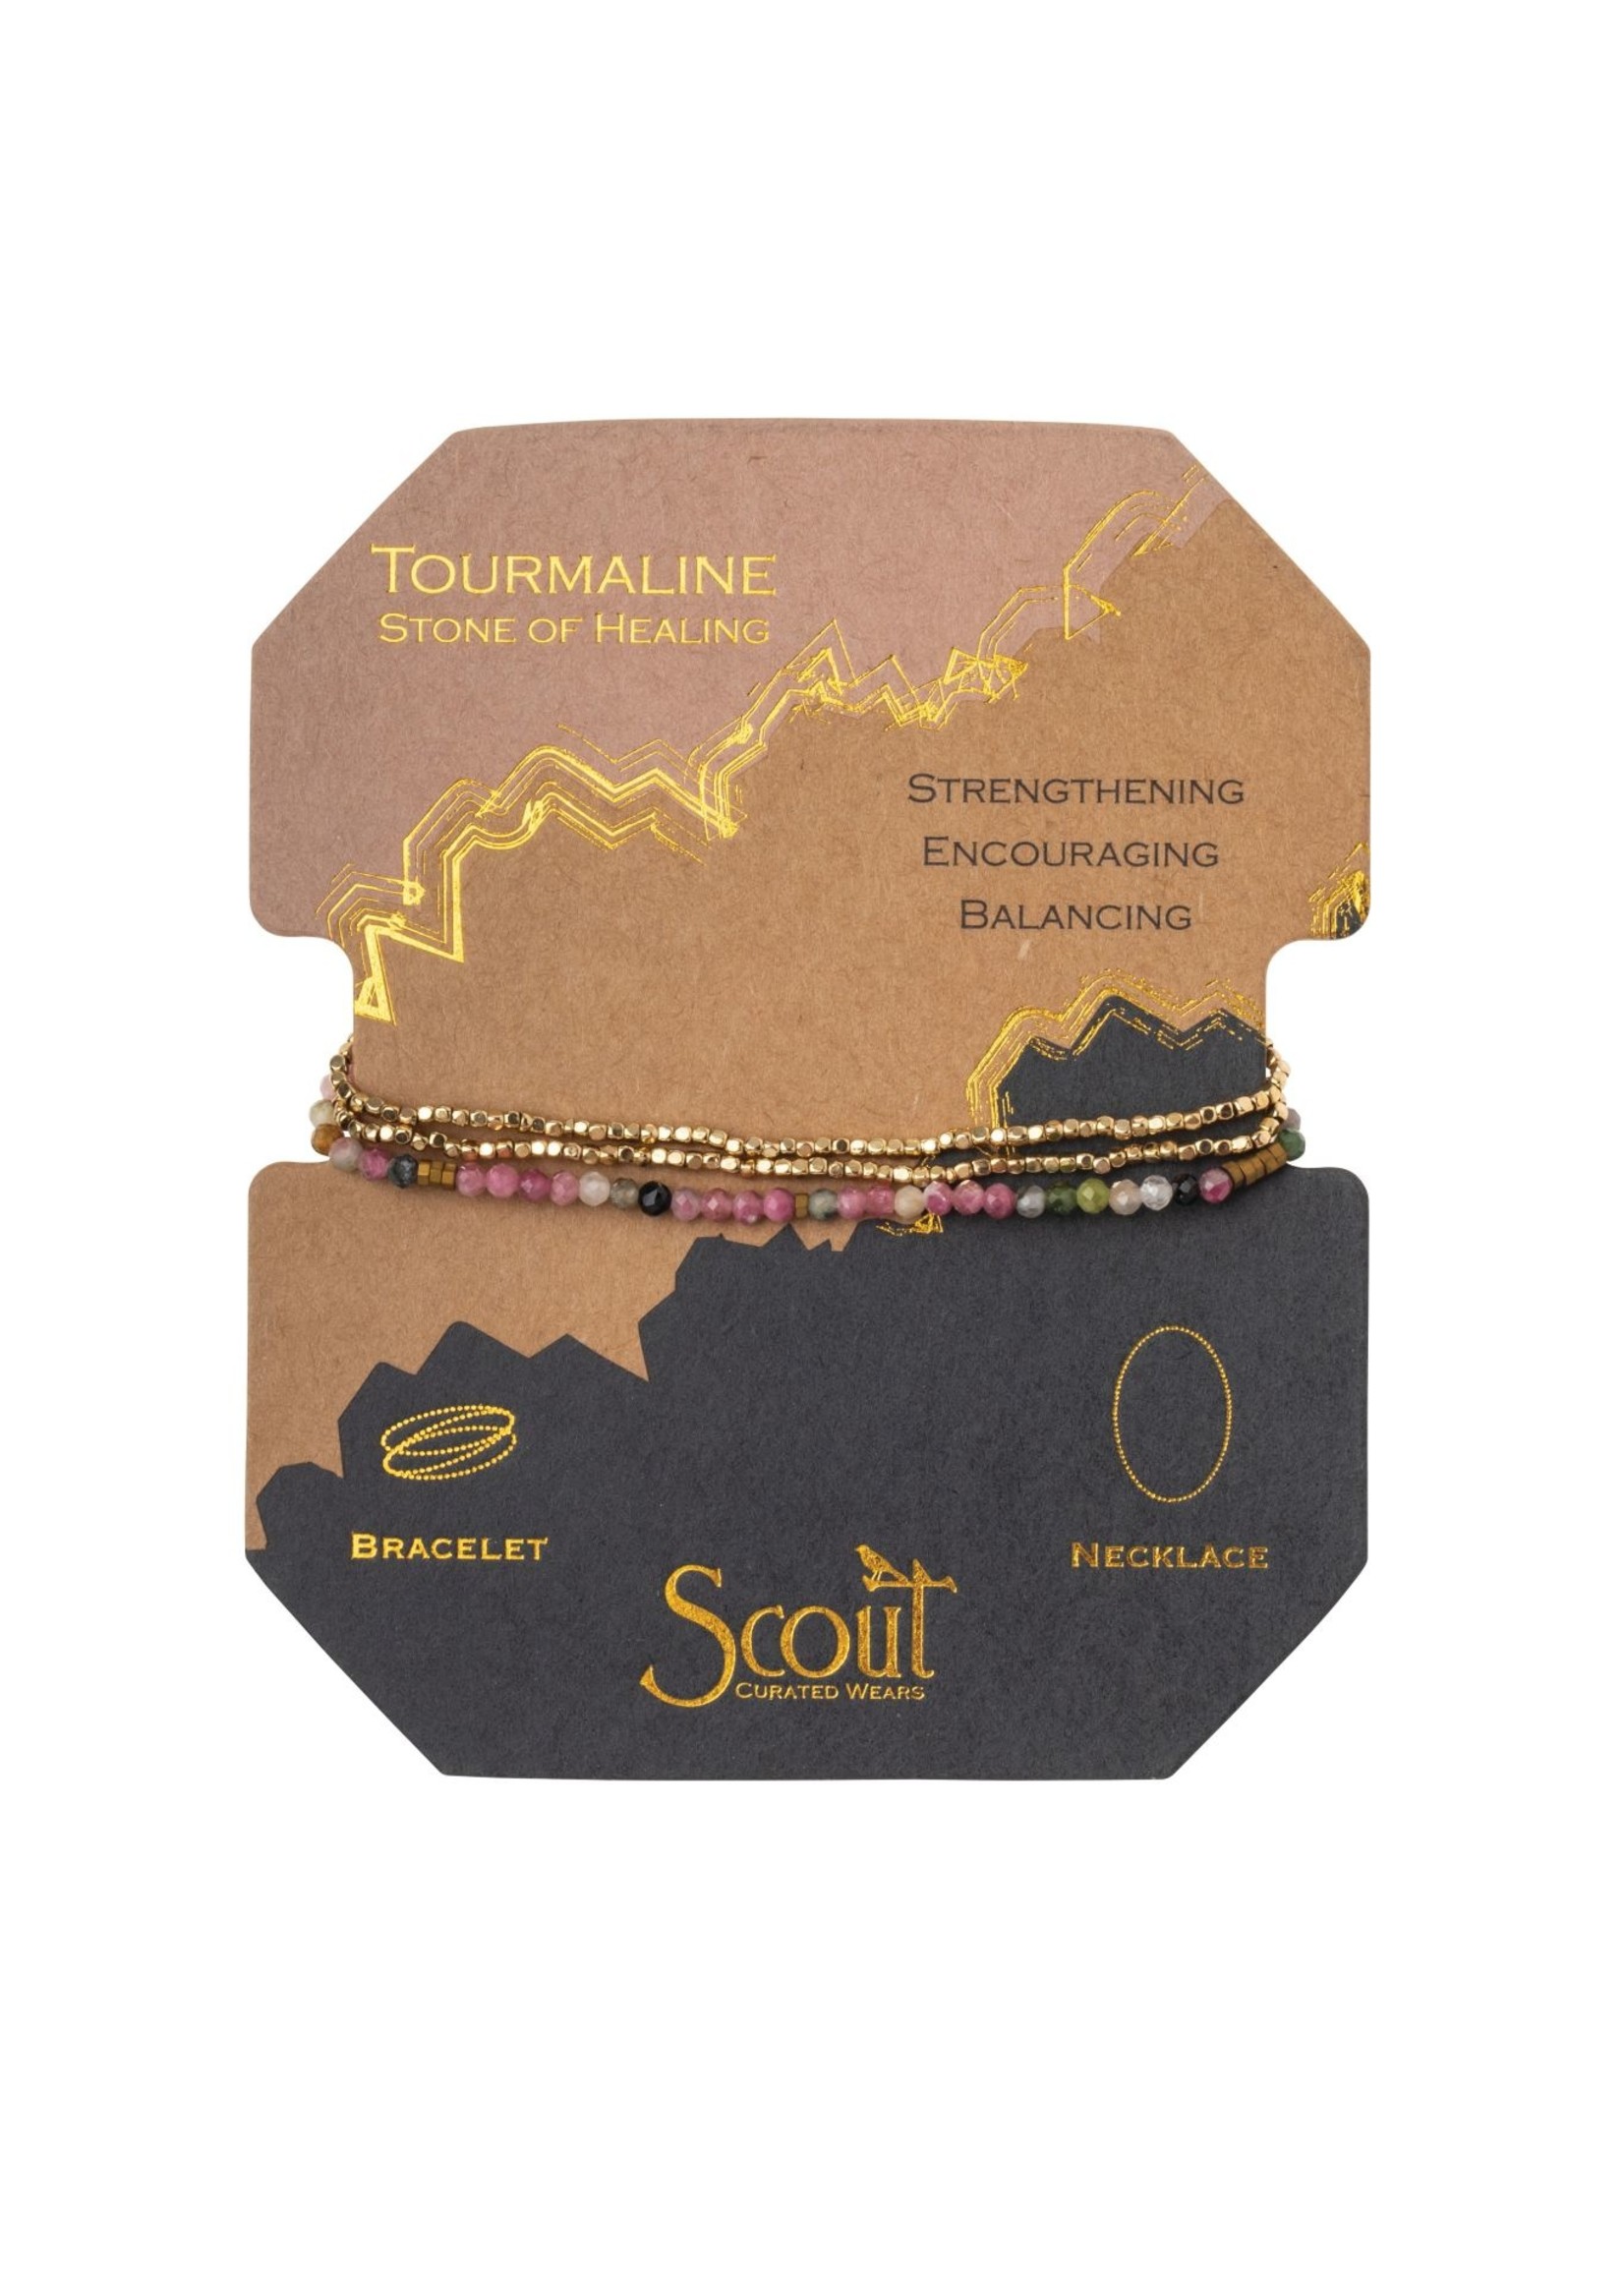 DELICATE STONE OF TOURMALINE/GOLD - STONE OF HEALING